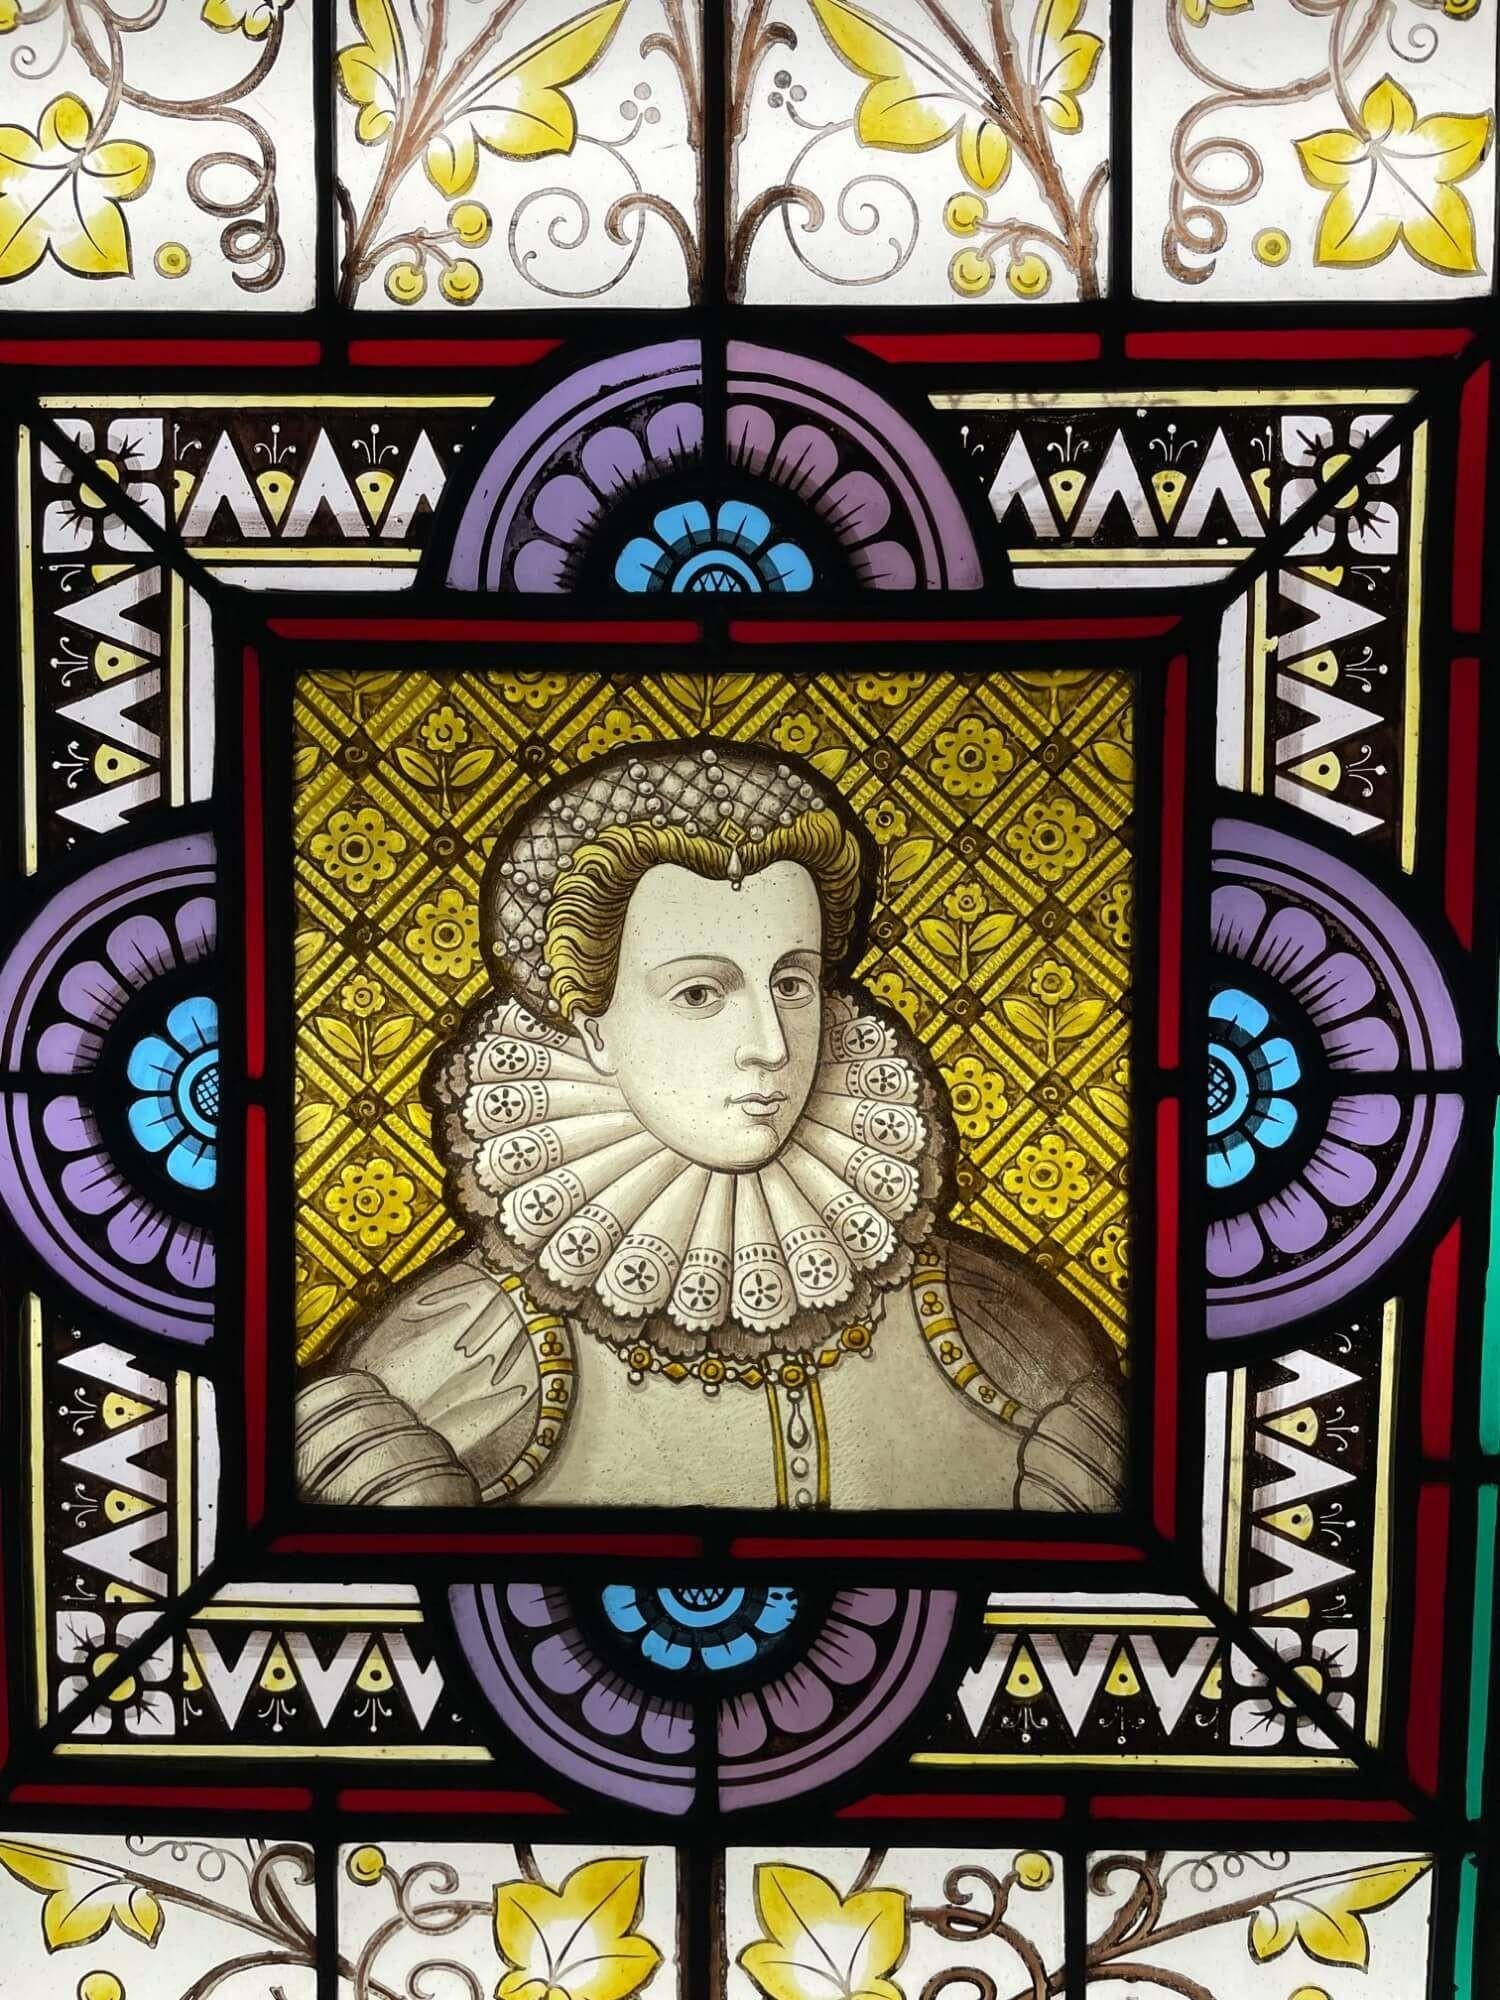 A late 19th century antique stained glass window panel depicting Mary Queen of Scots, one of 3 similar we are selling depicting notable figures of British history. At the centre is a distinguishable illustration of Mary Stuart, Queen of Scotland